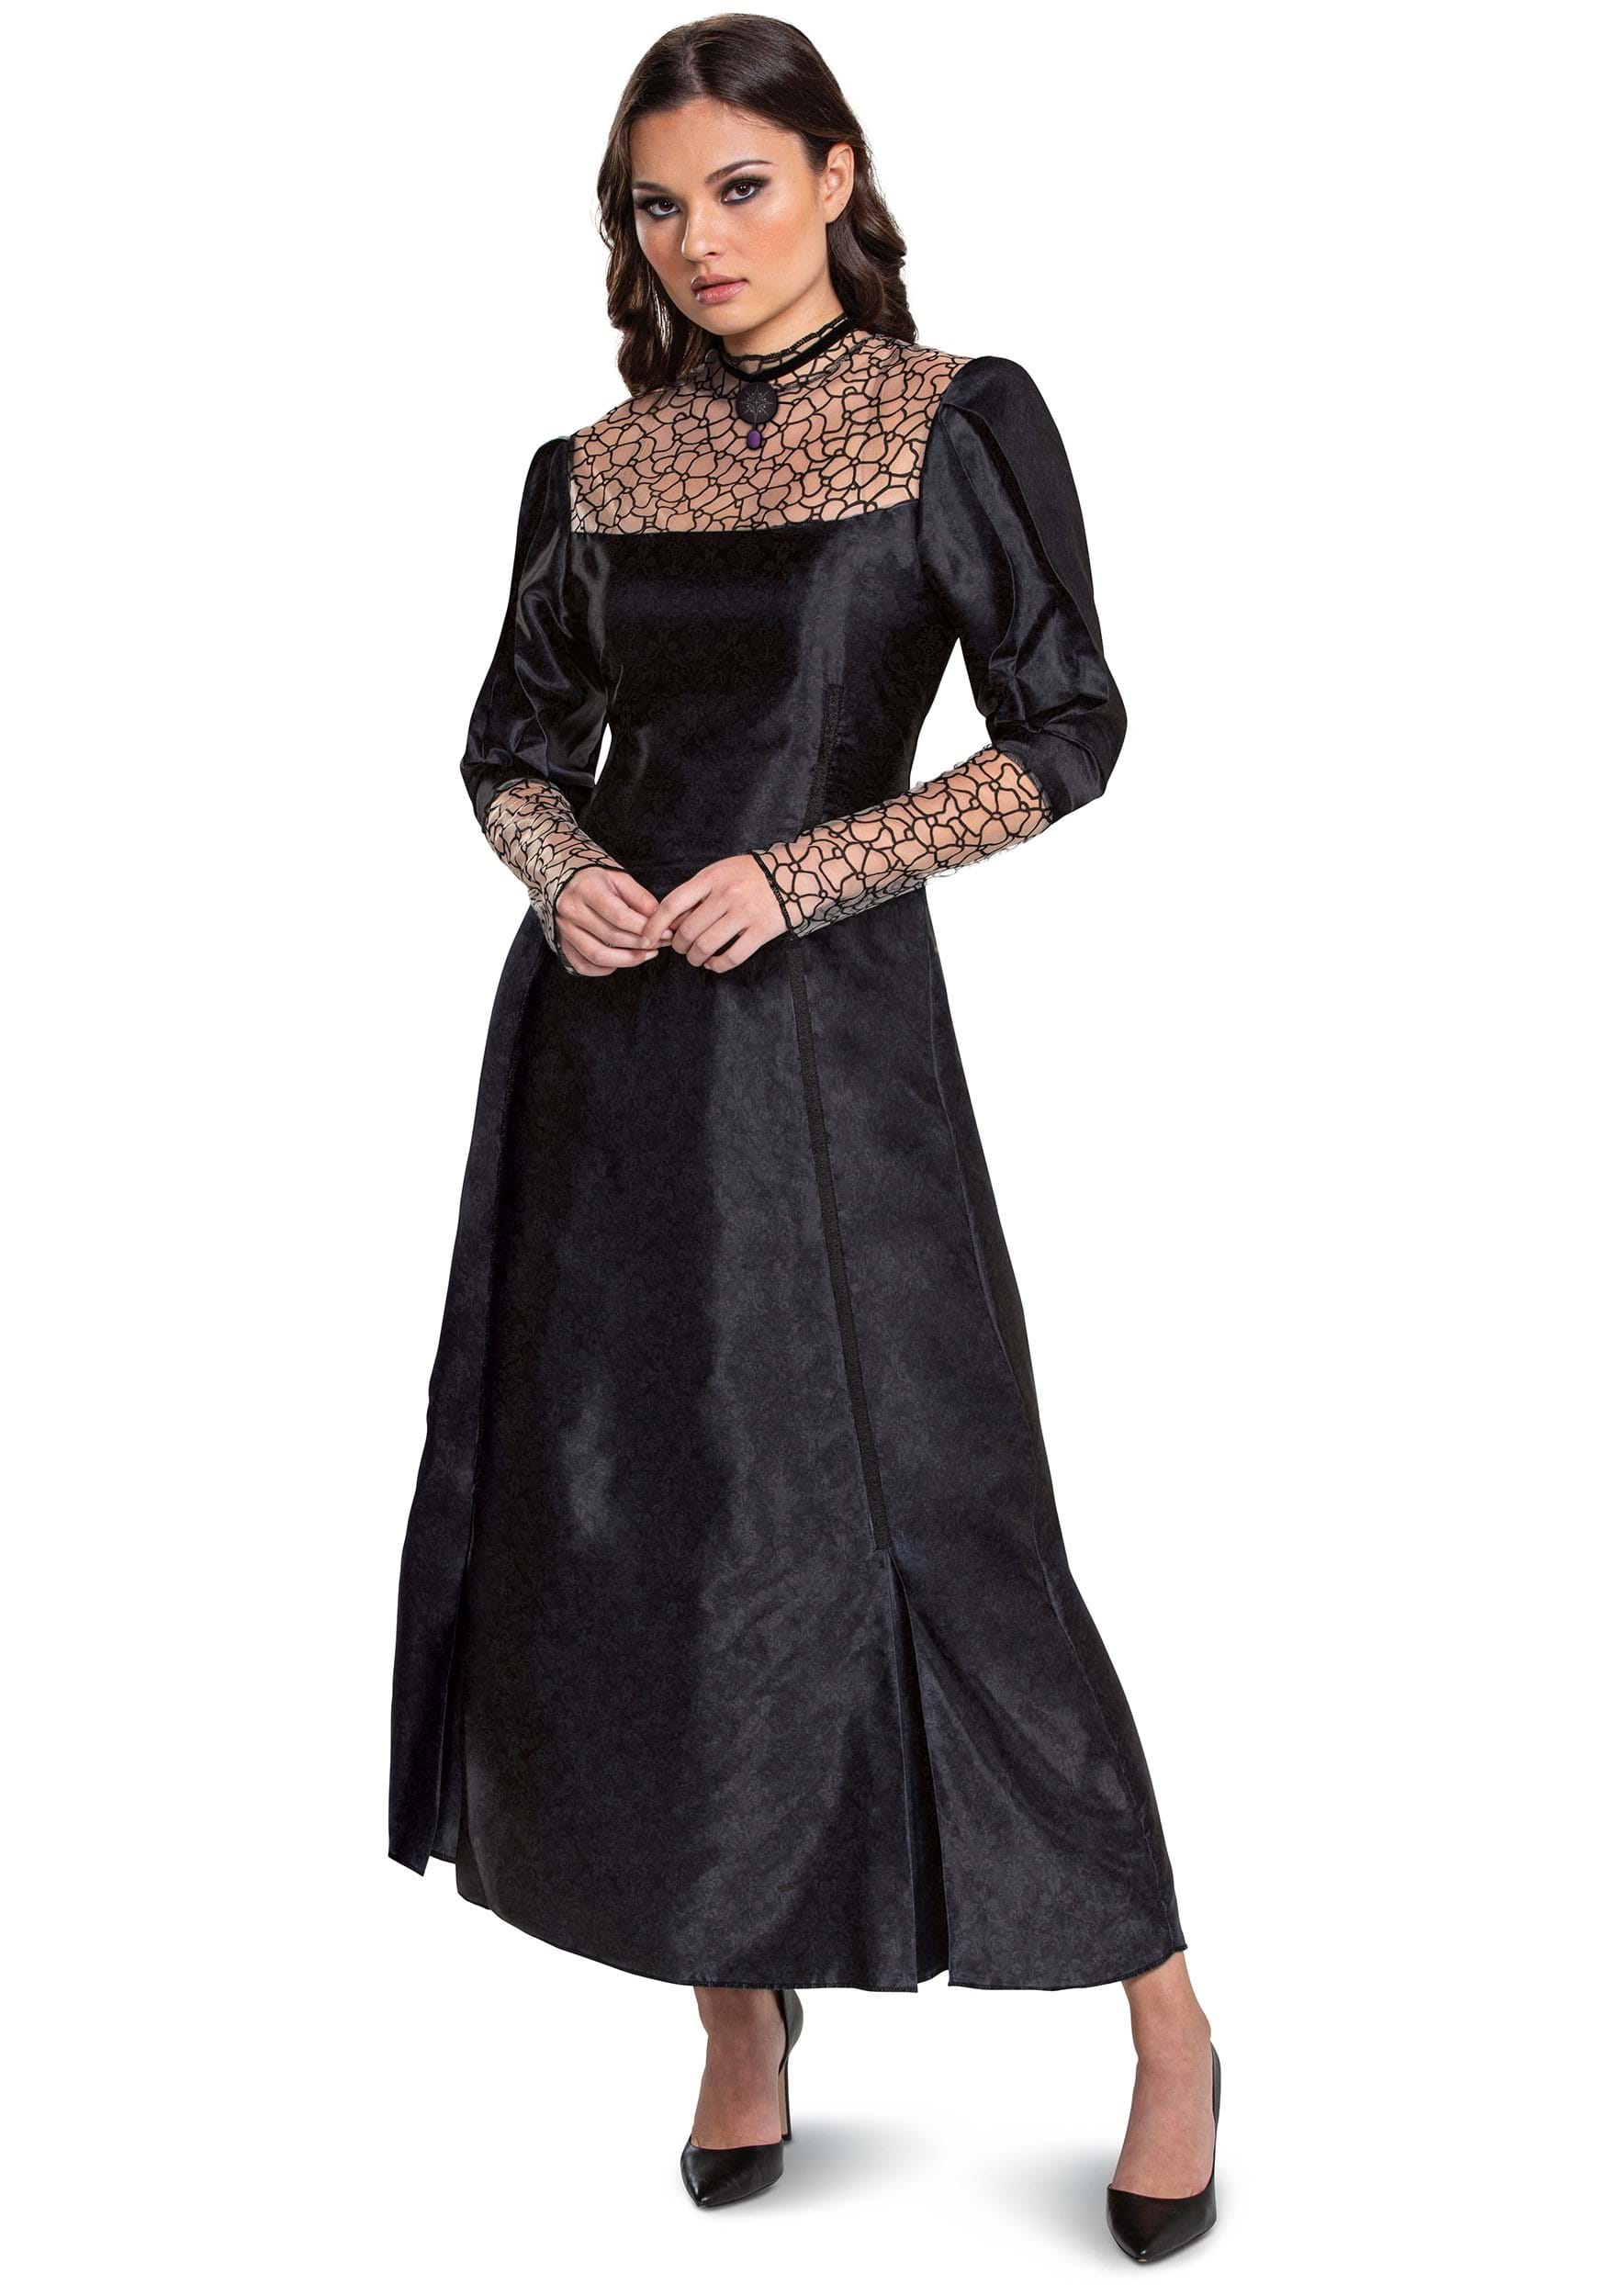 Women's The Witcher Classic Yennefer Costume